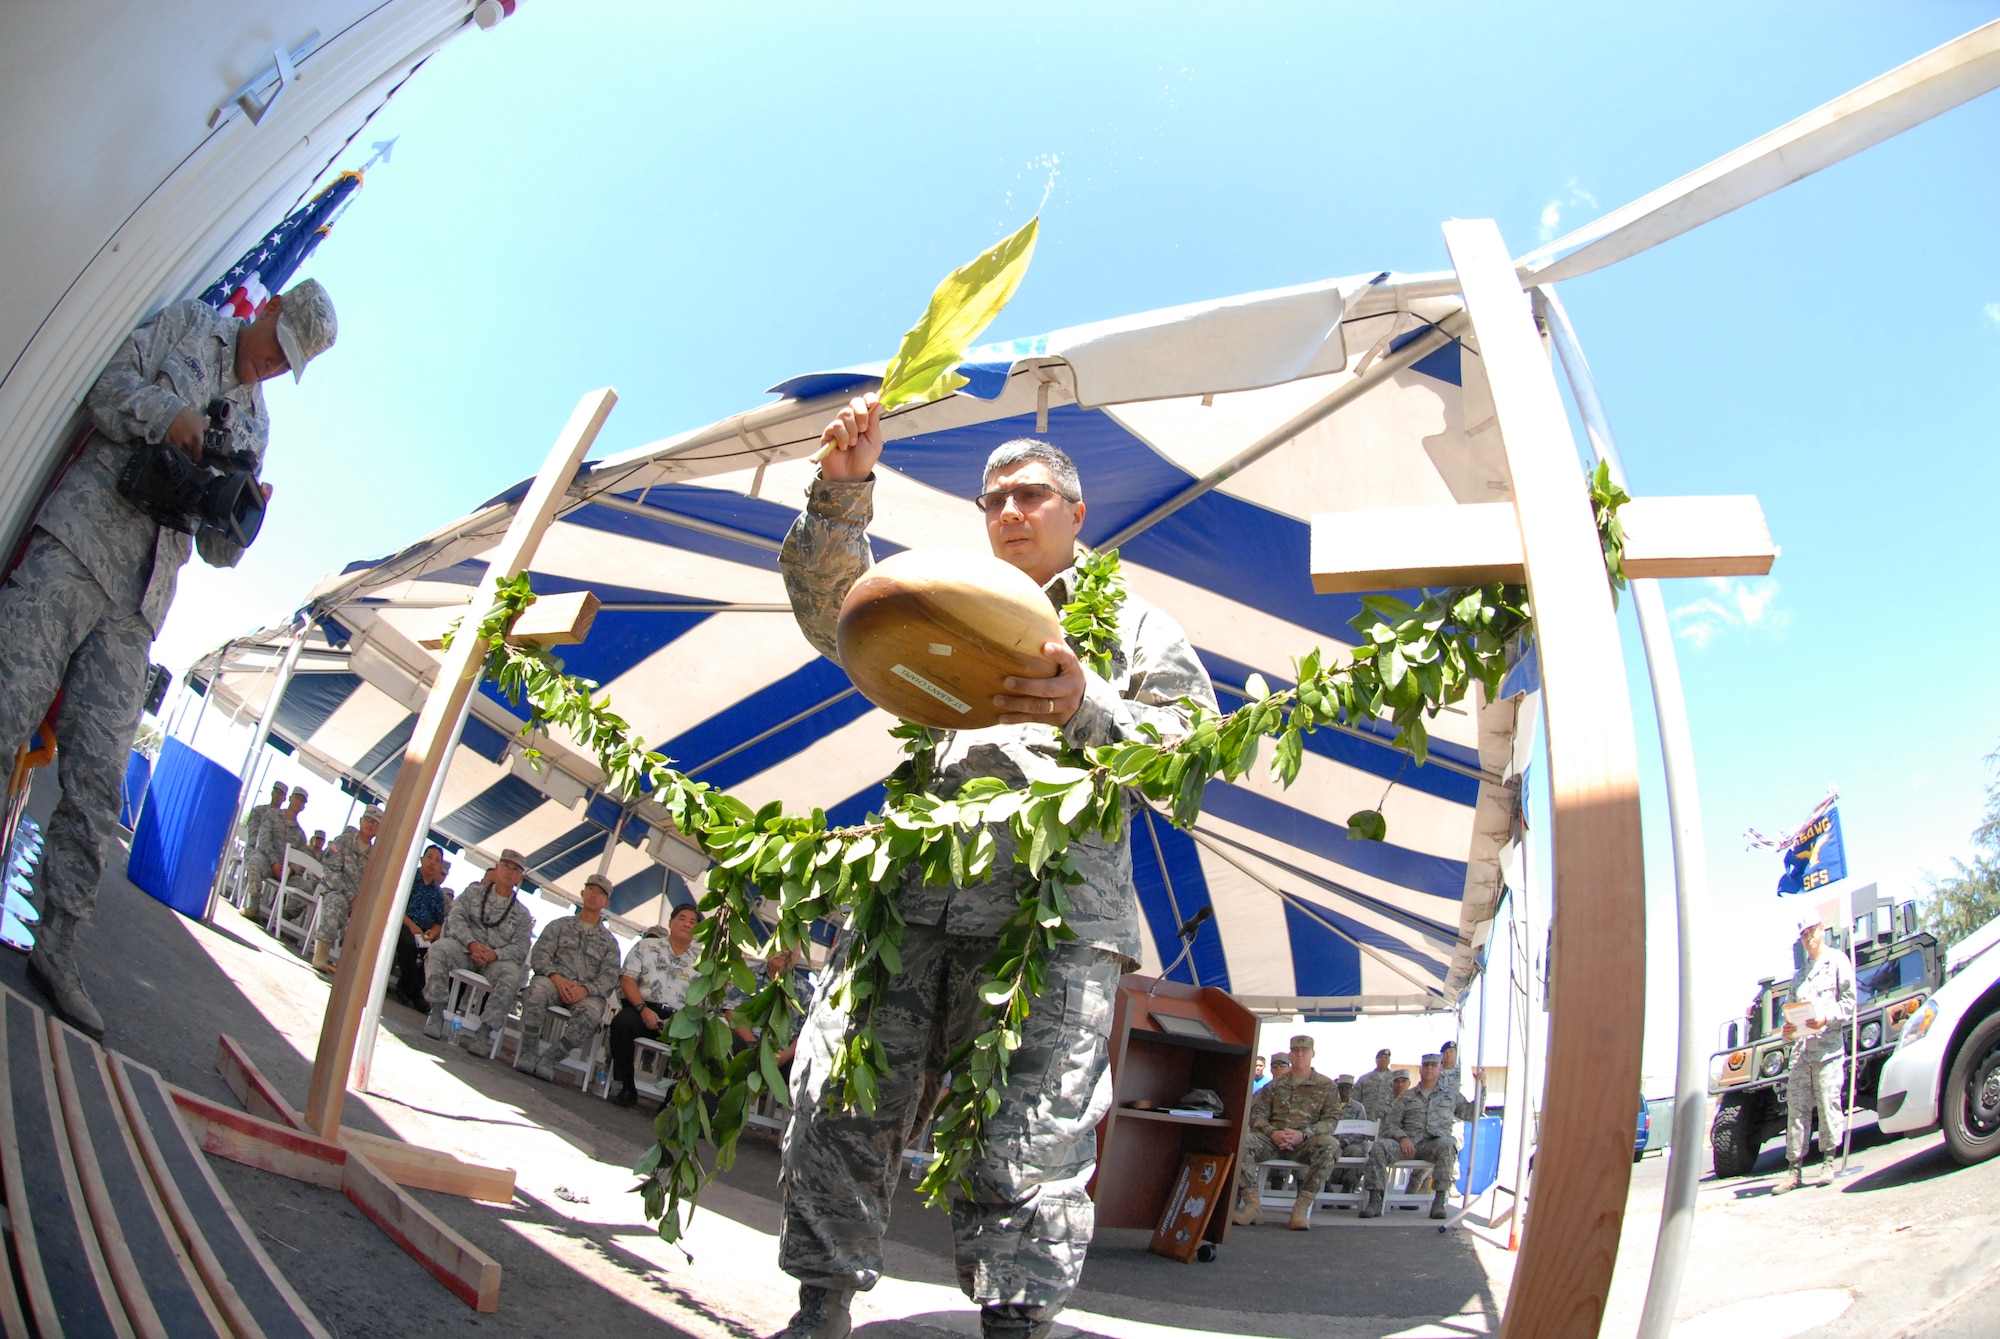 U.S. Air Force Chaplain Daniel Leatherman, 154th Wing Headquarters, performs a blessing at the 154th Security Forces Squadron (SFS) Indoor Firing Range on Joint Base Pearl Harbor-Hickam, Hawaii, Aug. 8, 2015. The Hawaiian tradition of unraveling of the maile lei, a native Hawaiian vine with shiny fragrant leaves, is similar to a typical ribbon cutting ceremony performed at the entrance of the new facility. (U.S. Air National Guard photo by Airman 1st Class Robert Cabuco)